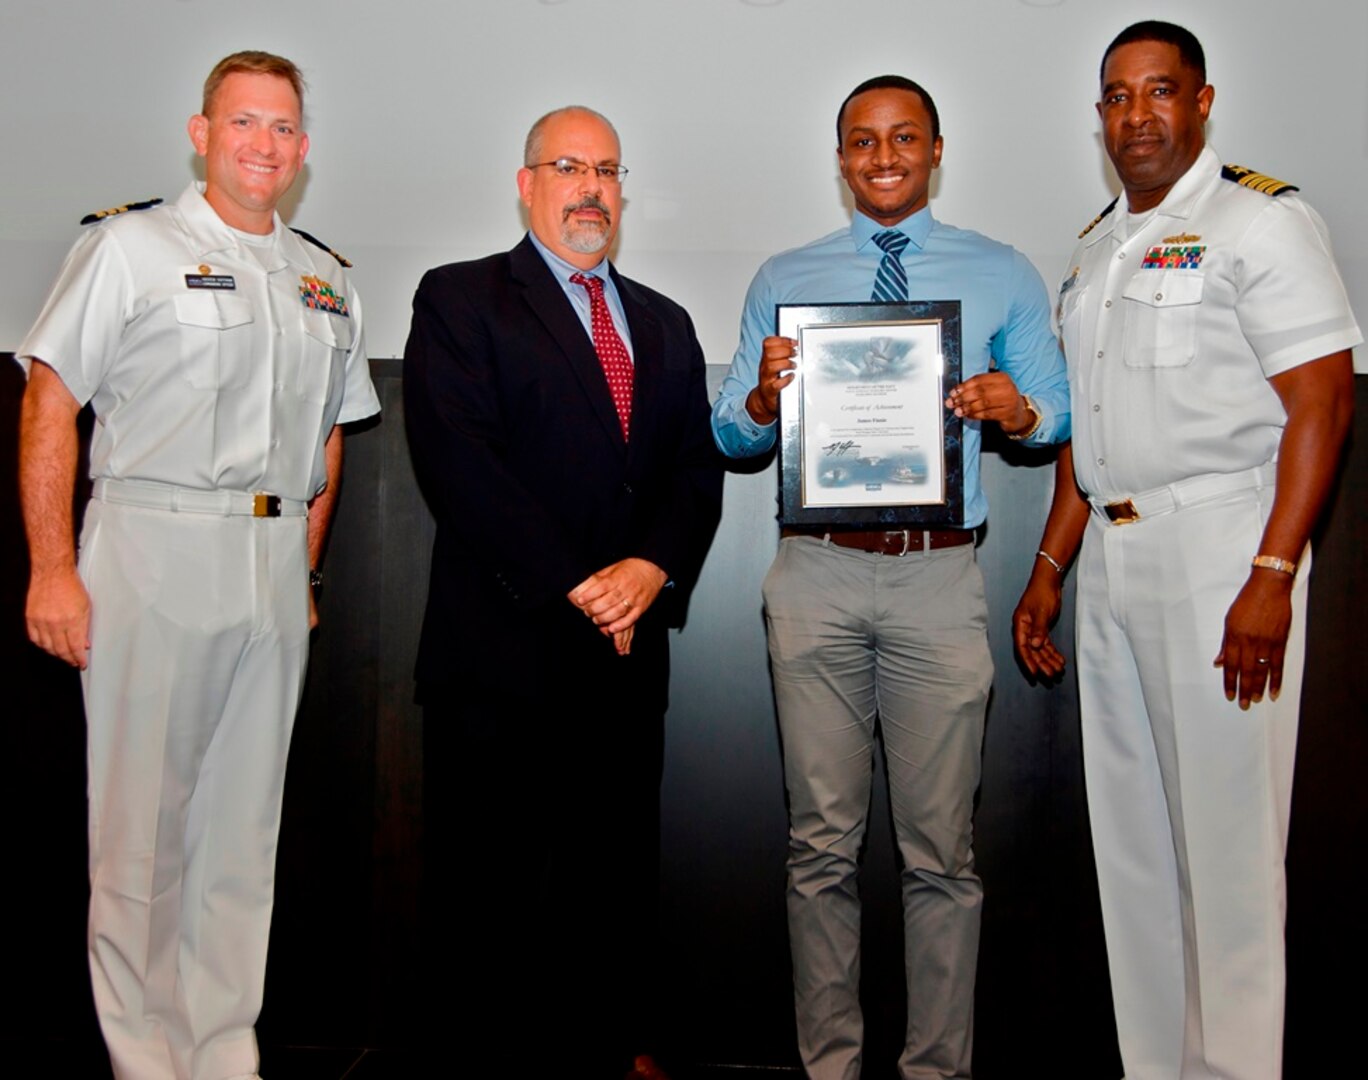 IMAGE: DAHLGREN, Va. - James Finnie receives his certificate of achievement from Naval Surface Warfare Center Dahlgren Division (NSWCDD) Technical Director John Fiore, NSWCDD Commanding Officer Capt. Godfrey 'Gus' Weekes, right, and Combat Direction Systems Activity Dam Neck Commanding Officer Cmdr. Andrew Hoffman at the 2017 NSWCDD academic awards ceremony. Finnie was recognized for completing his master's in cybersecurity engineering from Morgan State University, and commended for his commitment to personal and professional development.